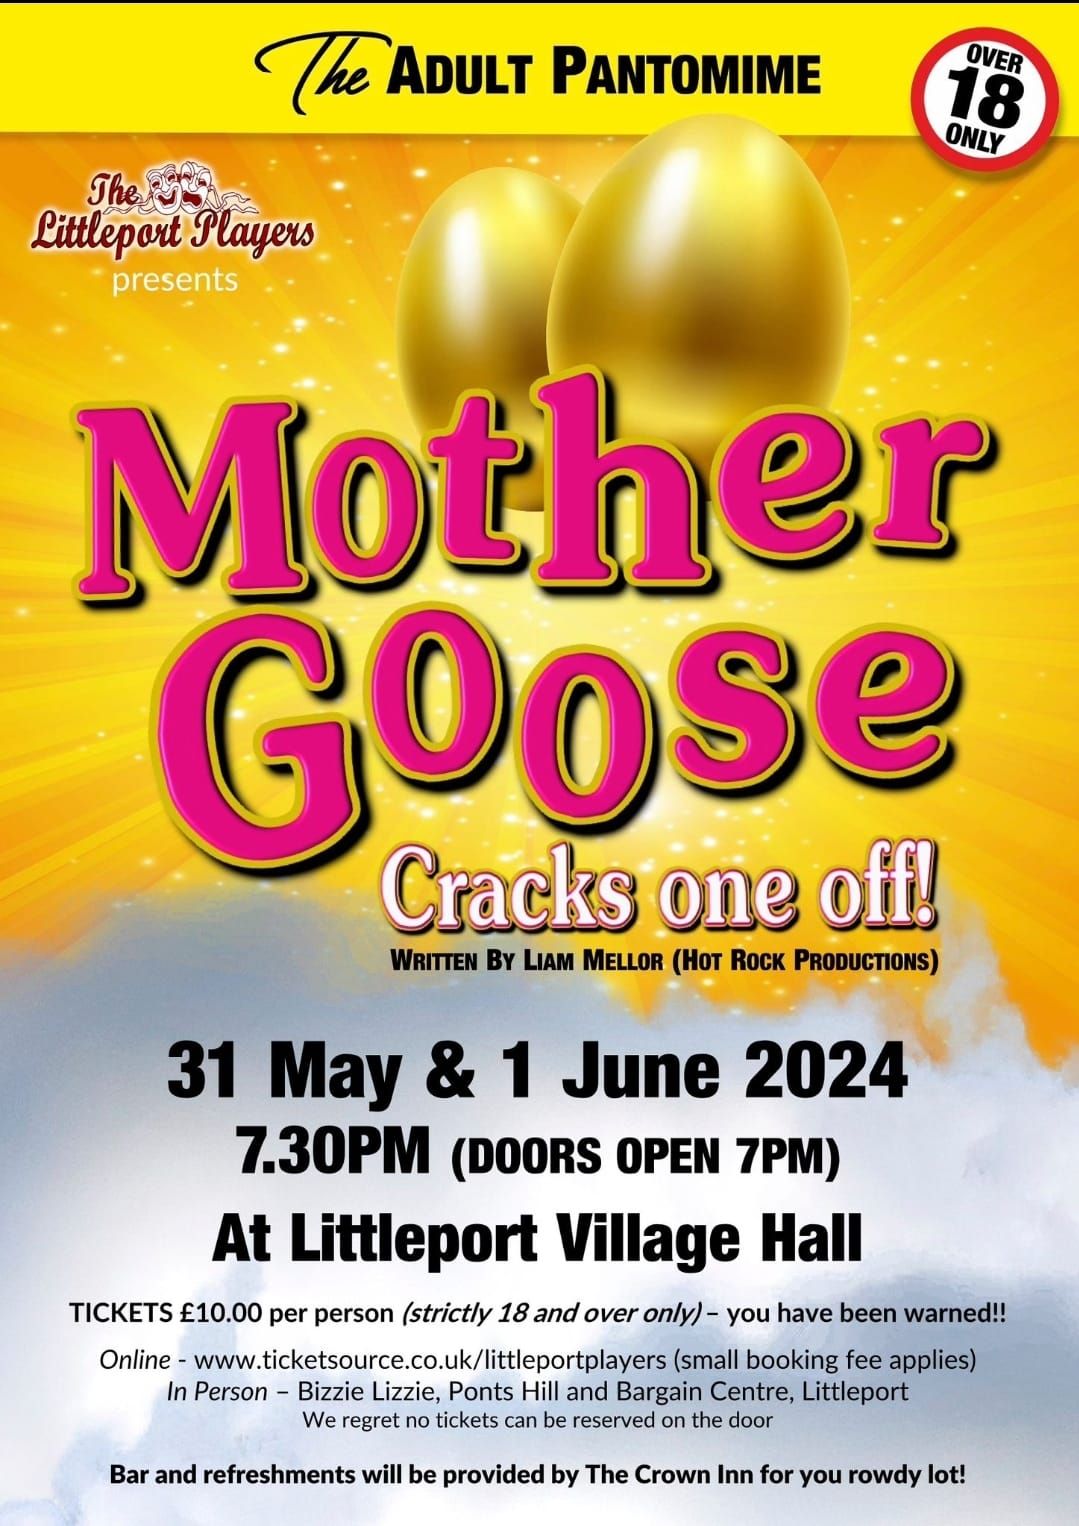 Adult panto Mother goose cracks one off